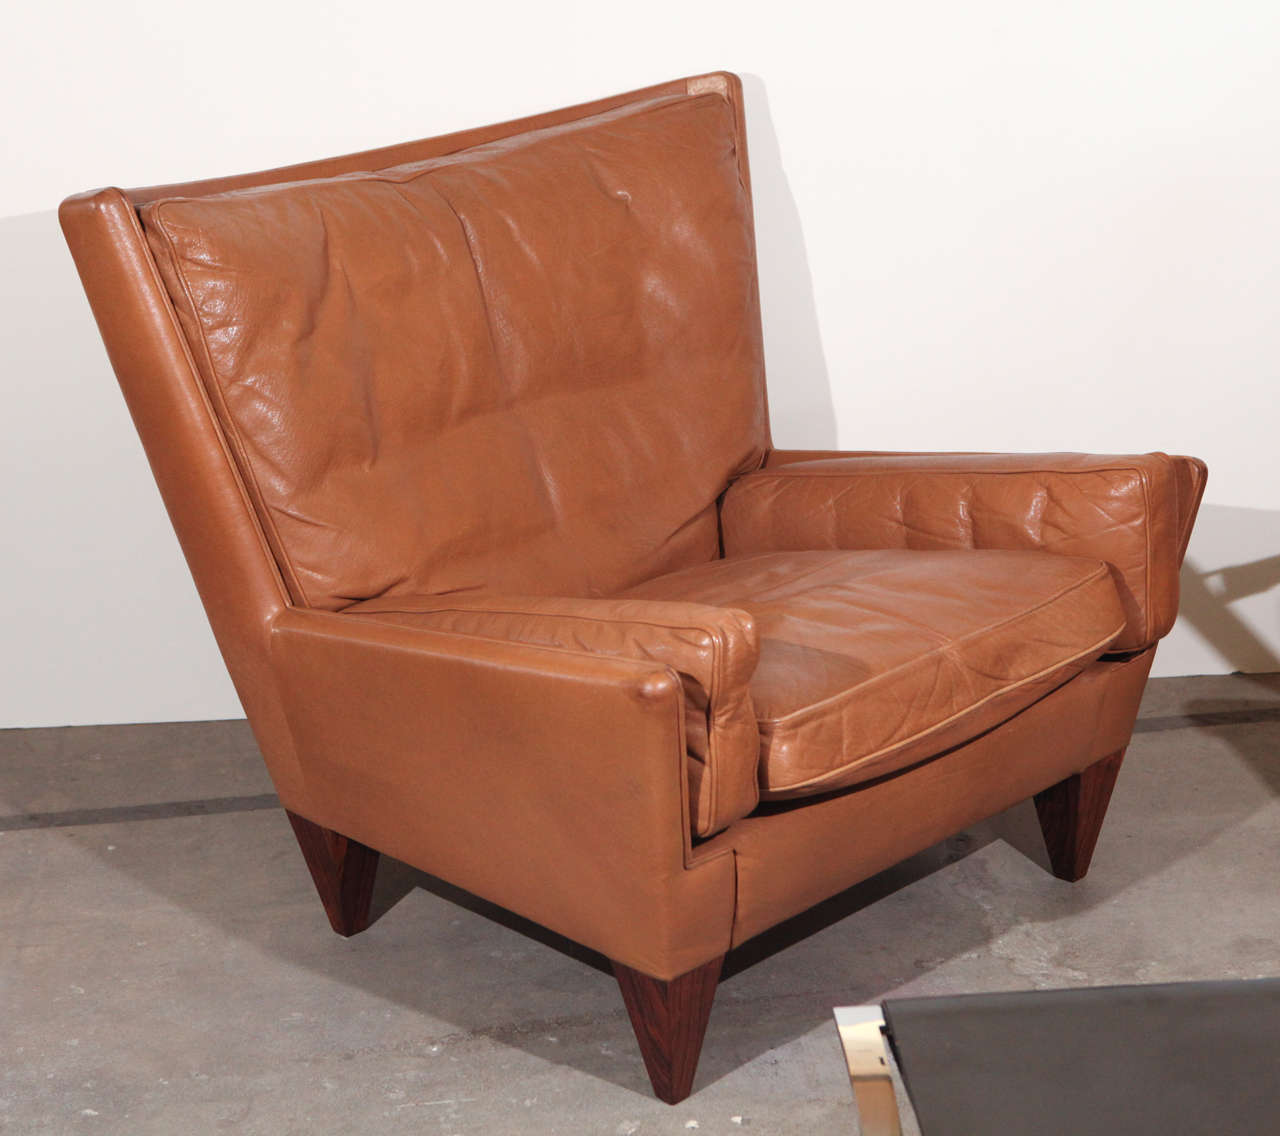 Denmark, Illum Wikkelso 'Pyramid' easy chair in rosewood and leather c.1967